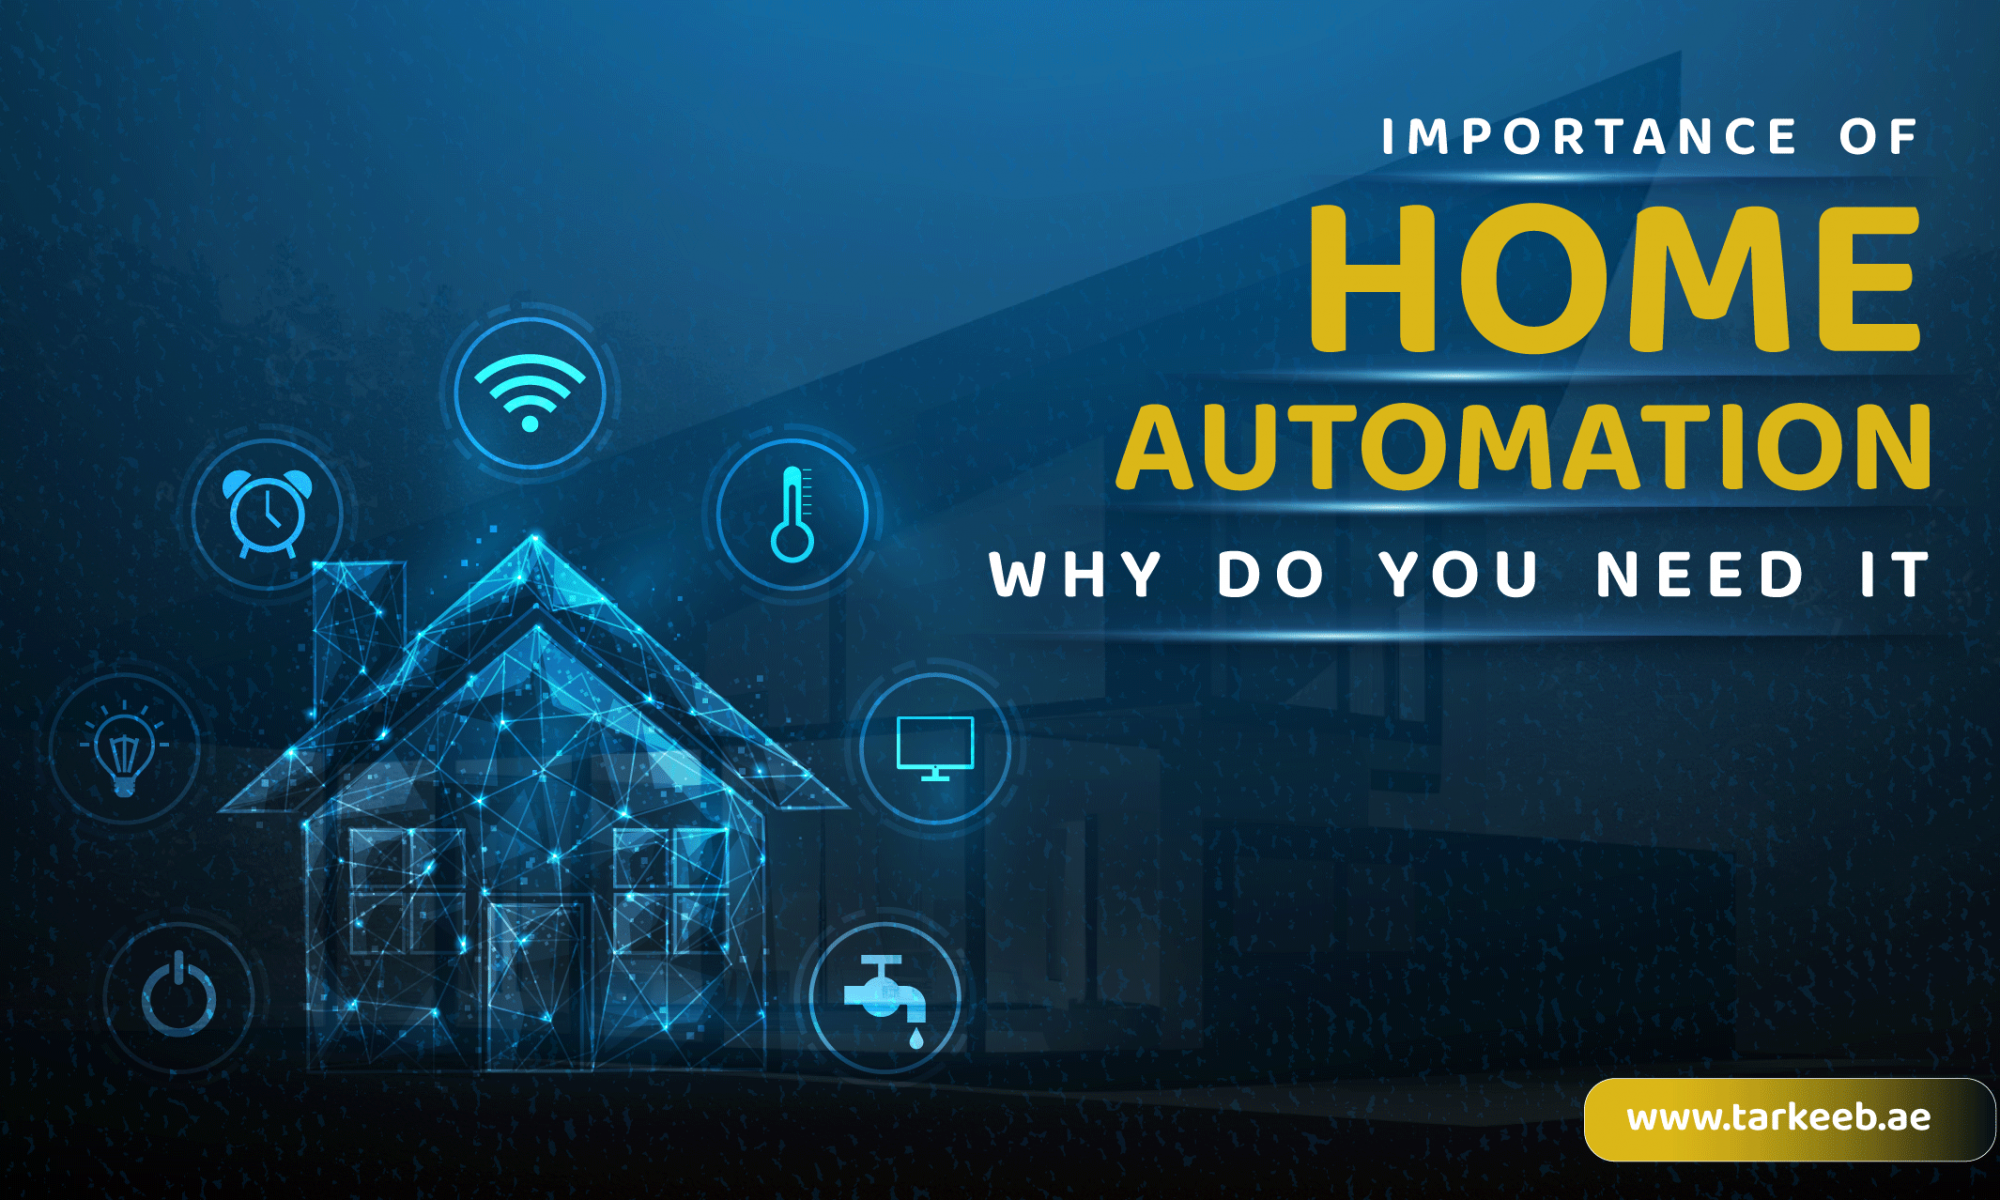 Importance of Home Automation